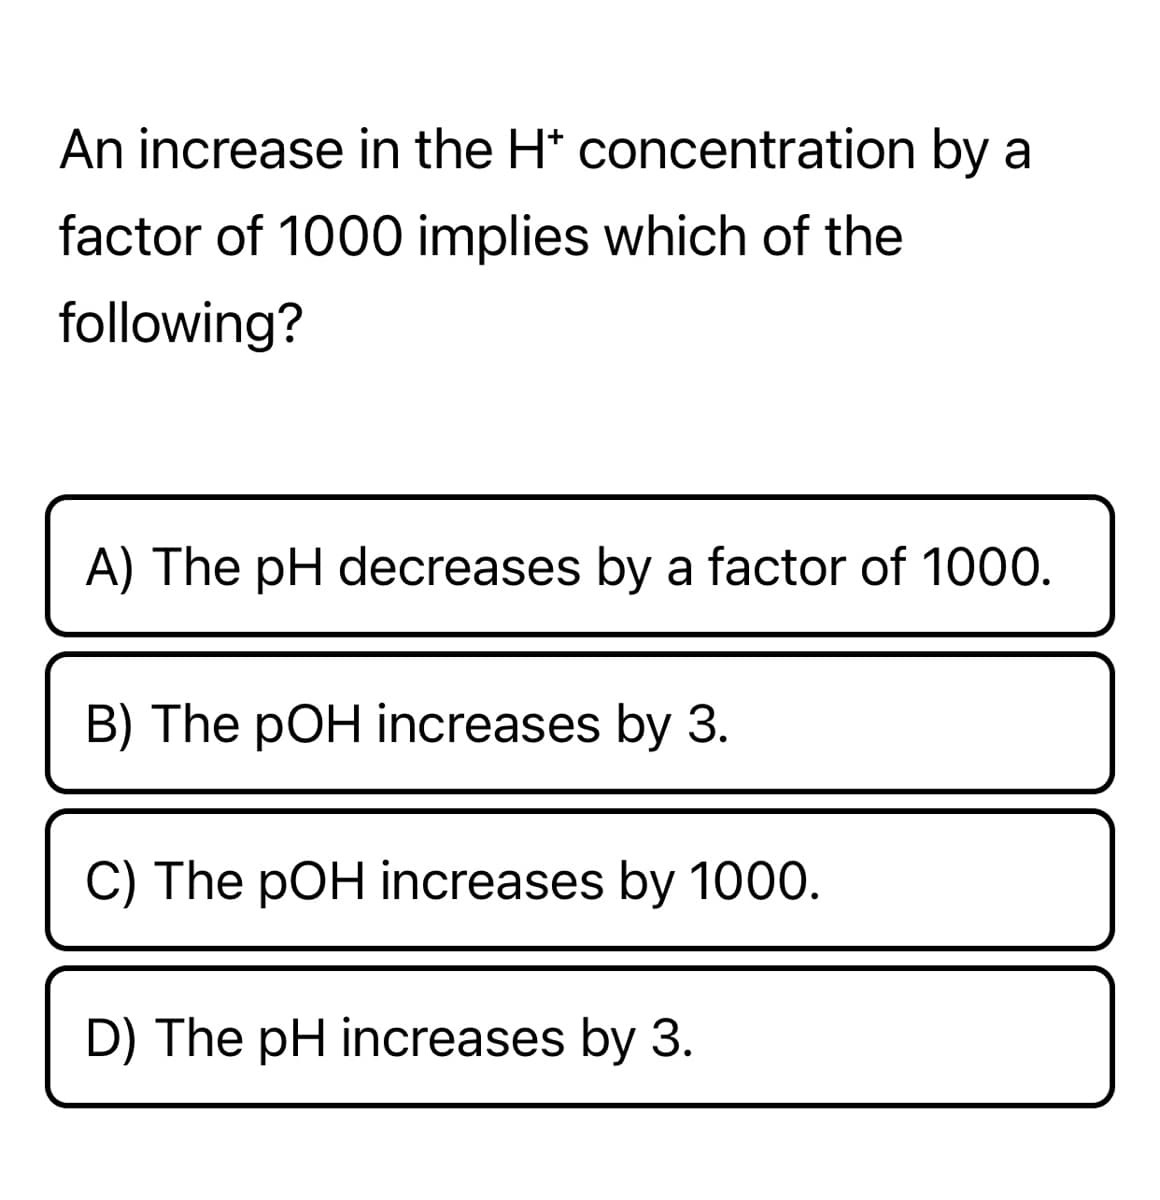 An increase in the H* concentration by a
factor of 1000 implies which of the
following?
A) The pH decreases by a factor of 1000.
B) The pOH increases by 3.
C) The pOH increases by 1000.
D) The pH increases by 3.
